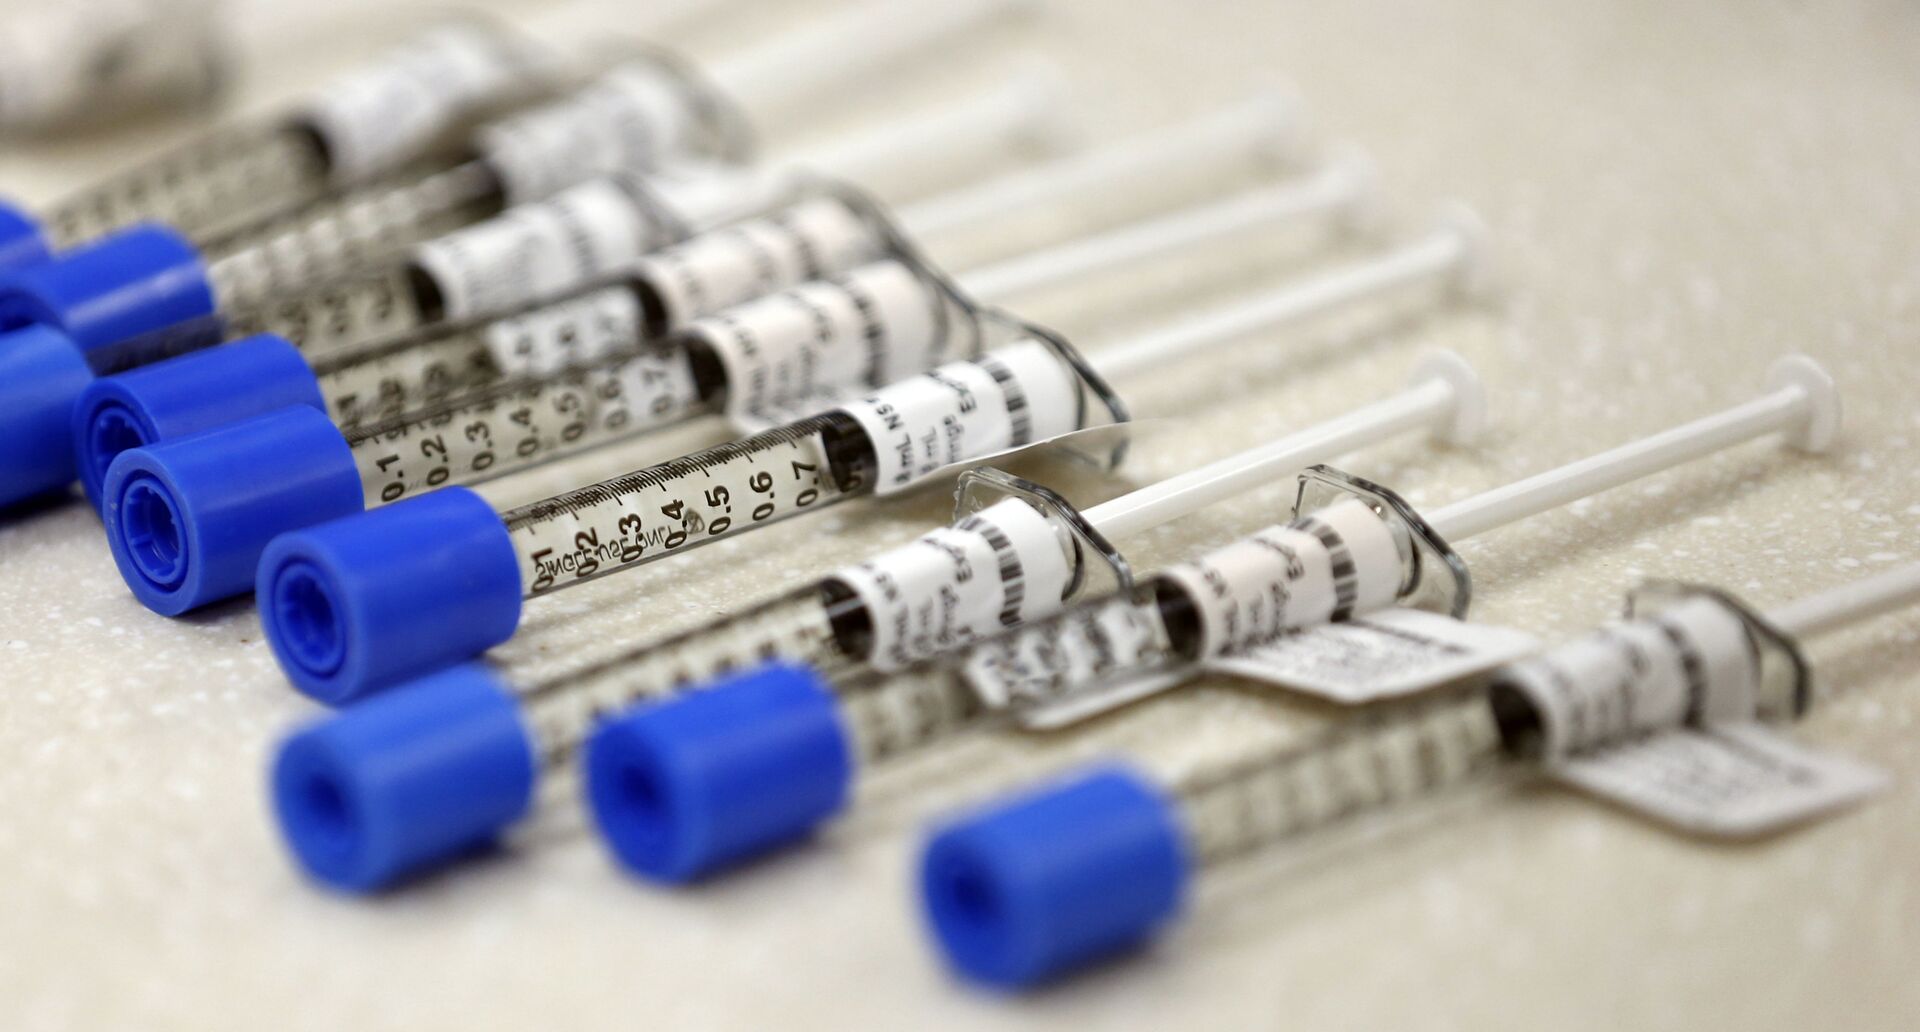 This file photo shows syringes of the opioid painkiller fentanyl in an inpatient pharmacy. - Sputnik International, 1920, 25.04.2022